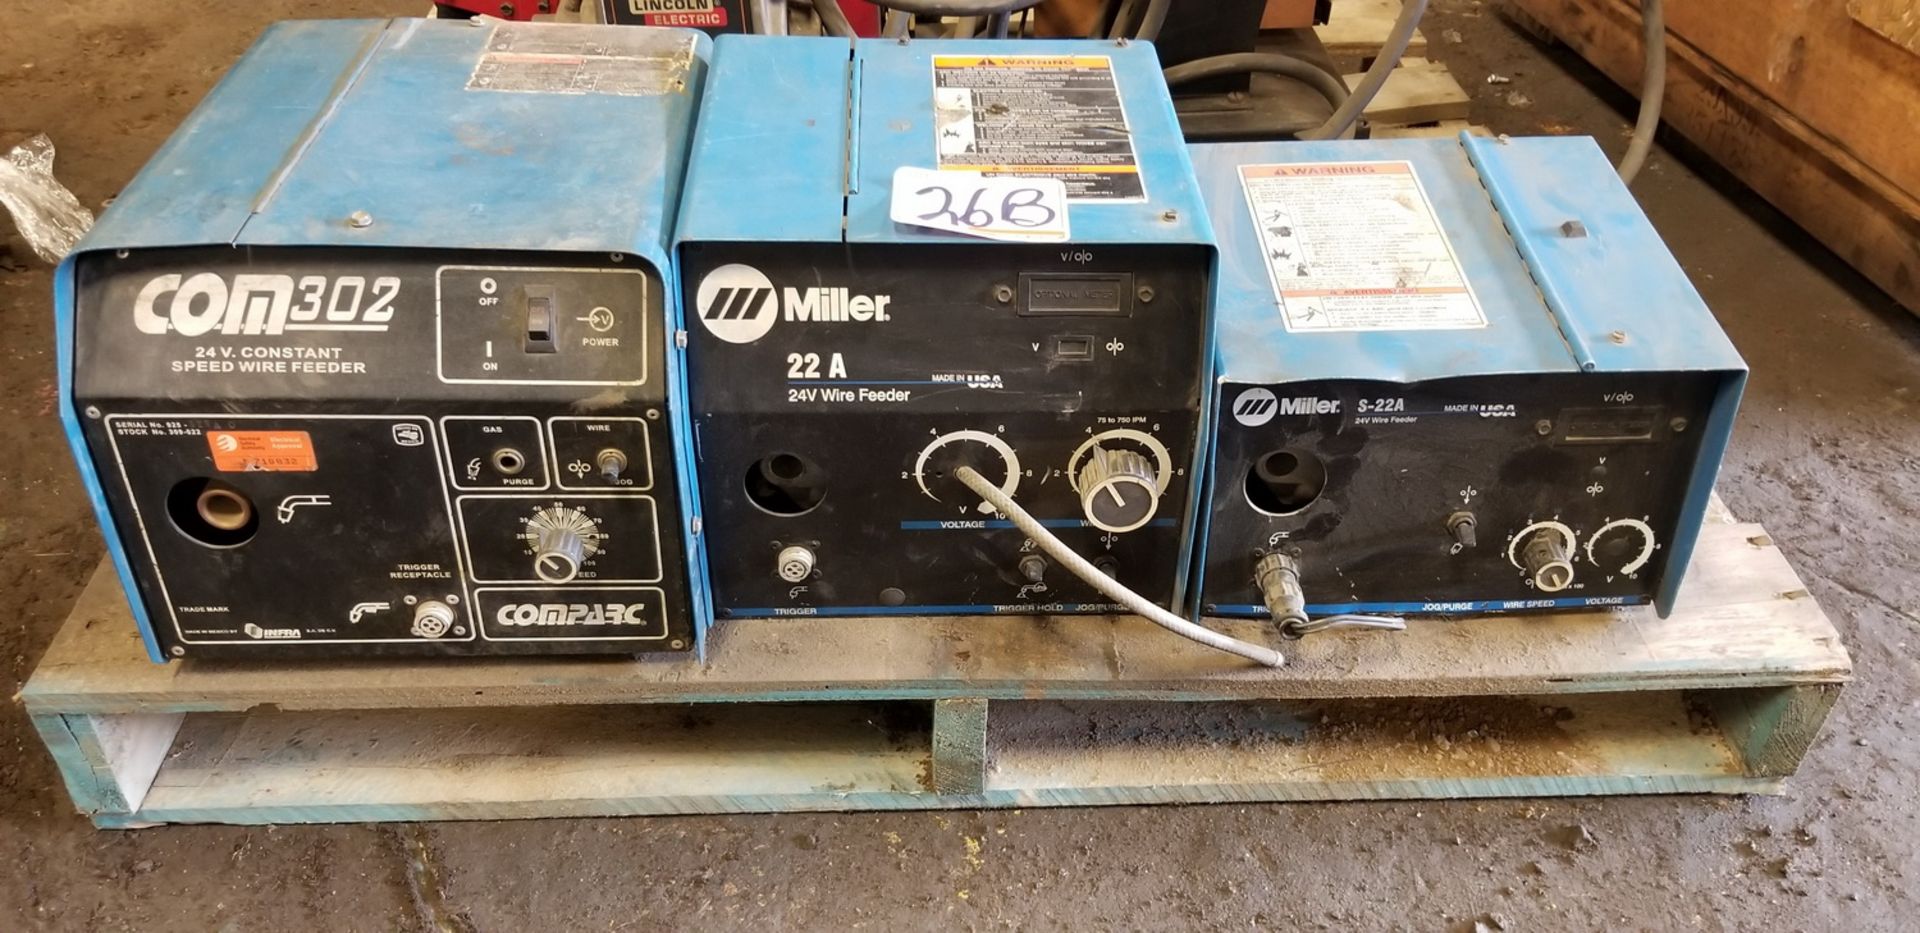 LOT - LINCOLN ELECTRIC LN-10, MILLER 22A & S-22A & COMPARC 302 WIRE FEEDERS (4 UNITS) - Image 2 of 2